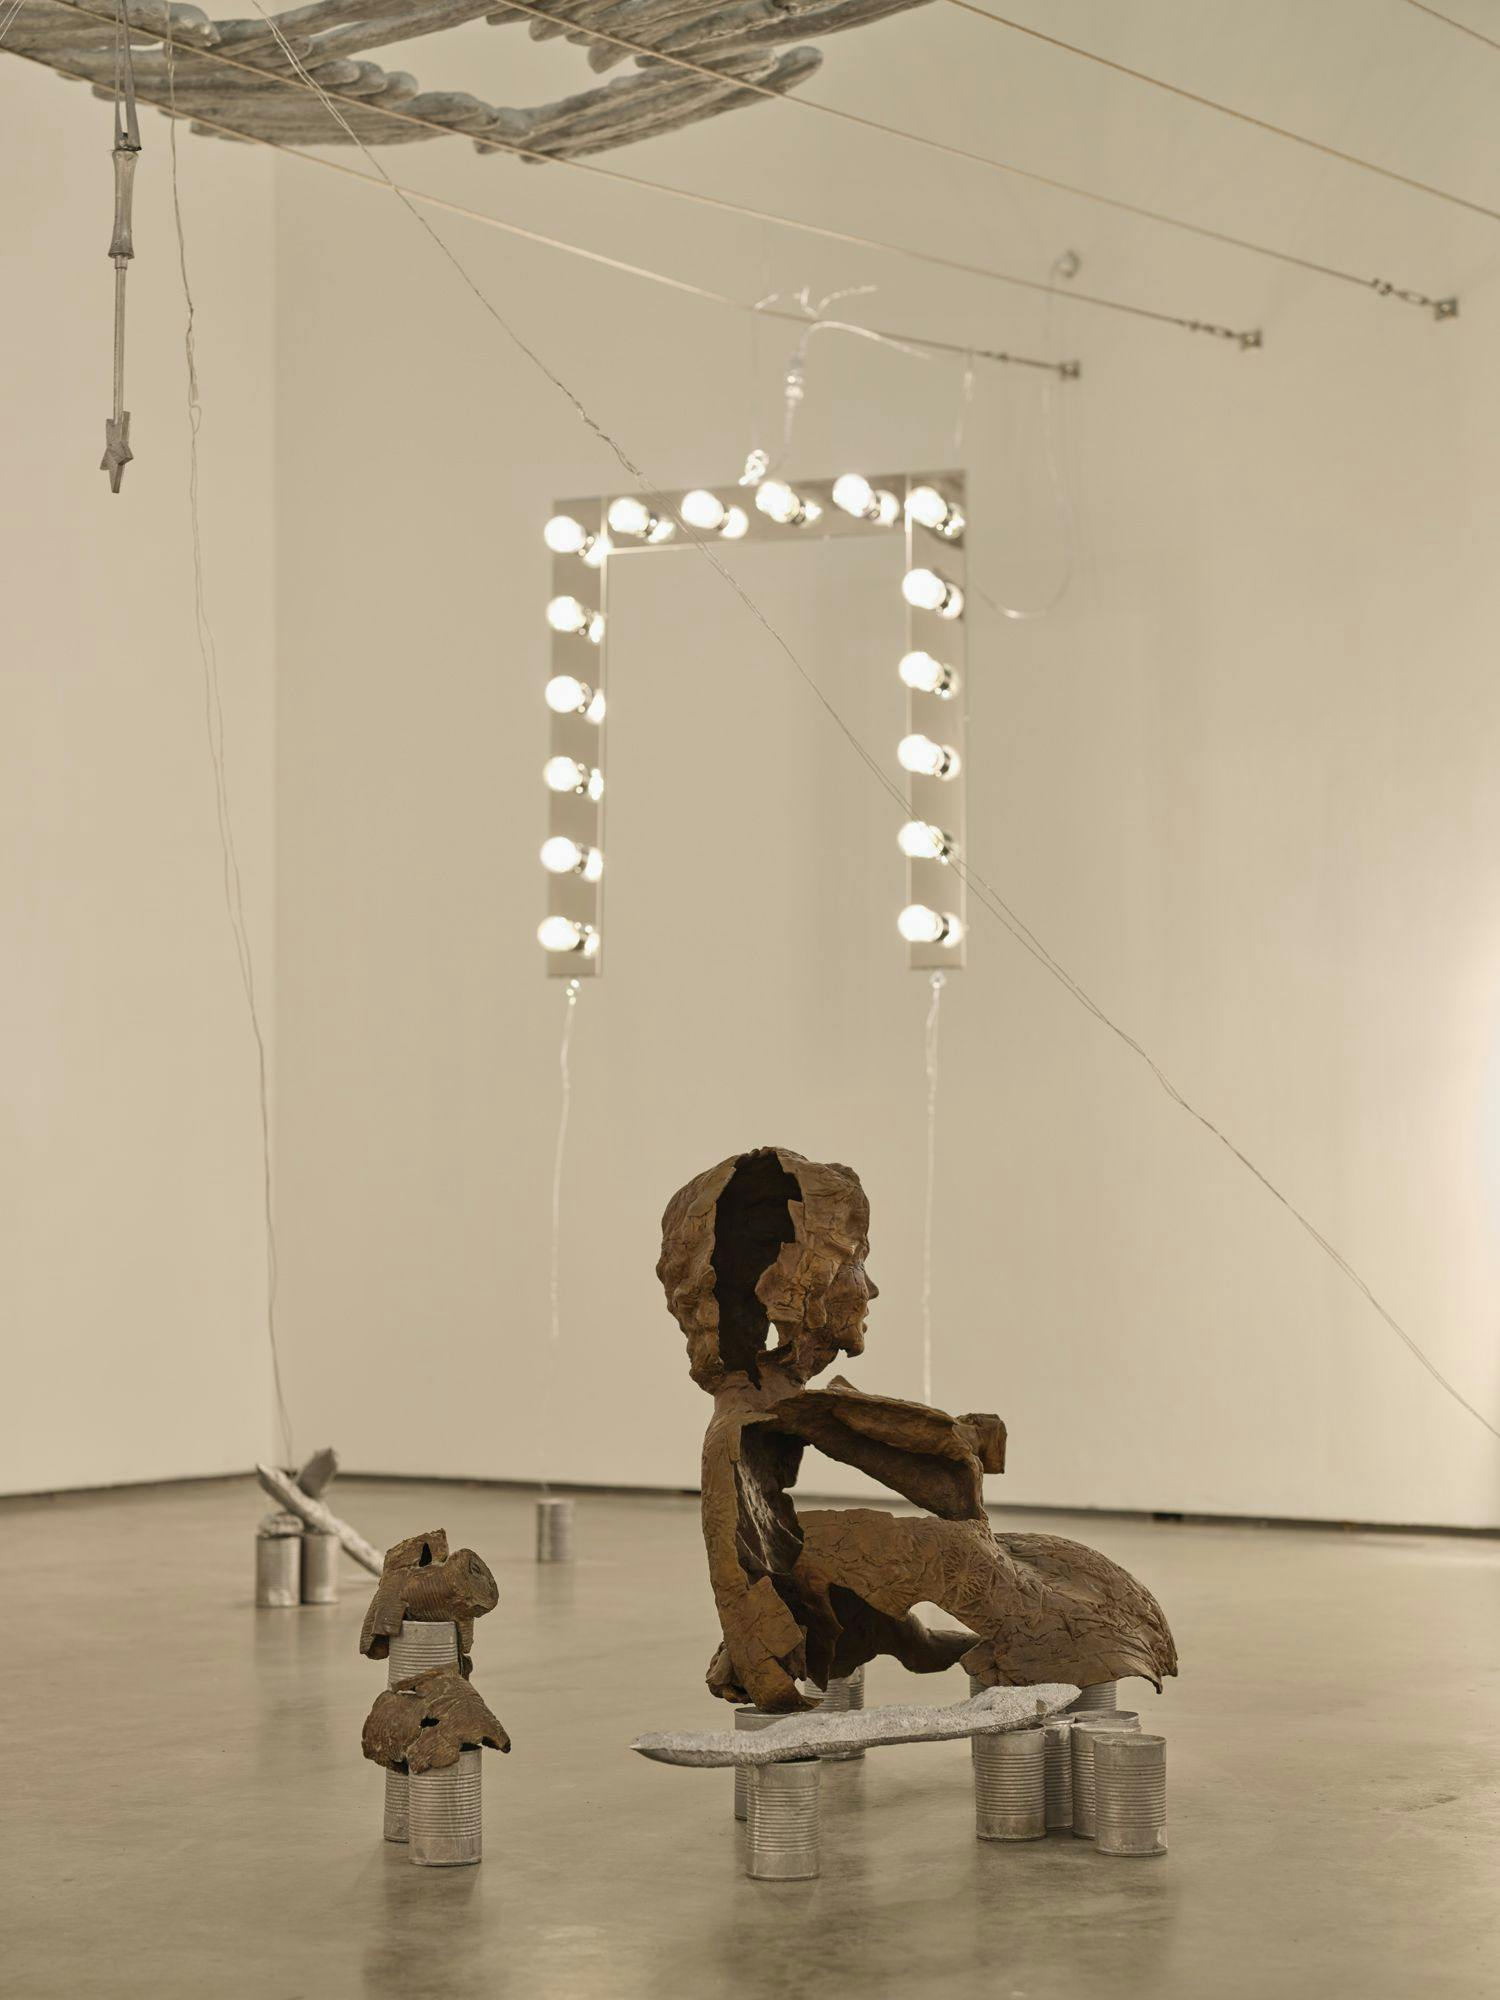 A bronze sculpture of a partial human figure sits among aluminum cans, baguettes and smaller bronze forms. Above, a magic wand, silver baguettes and a vanity light hang from wire.